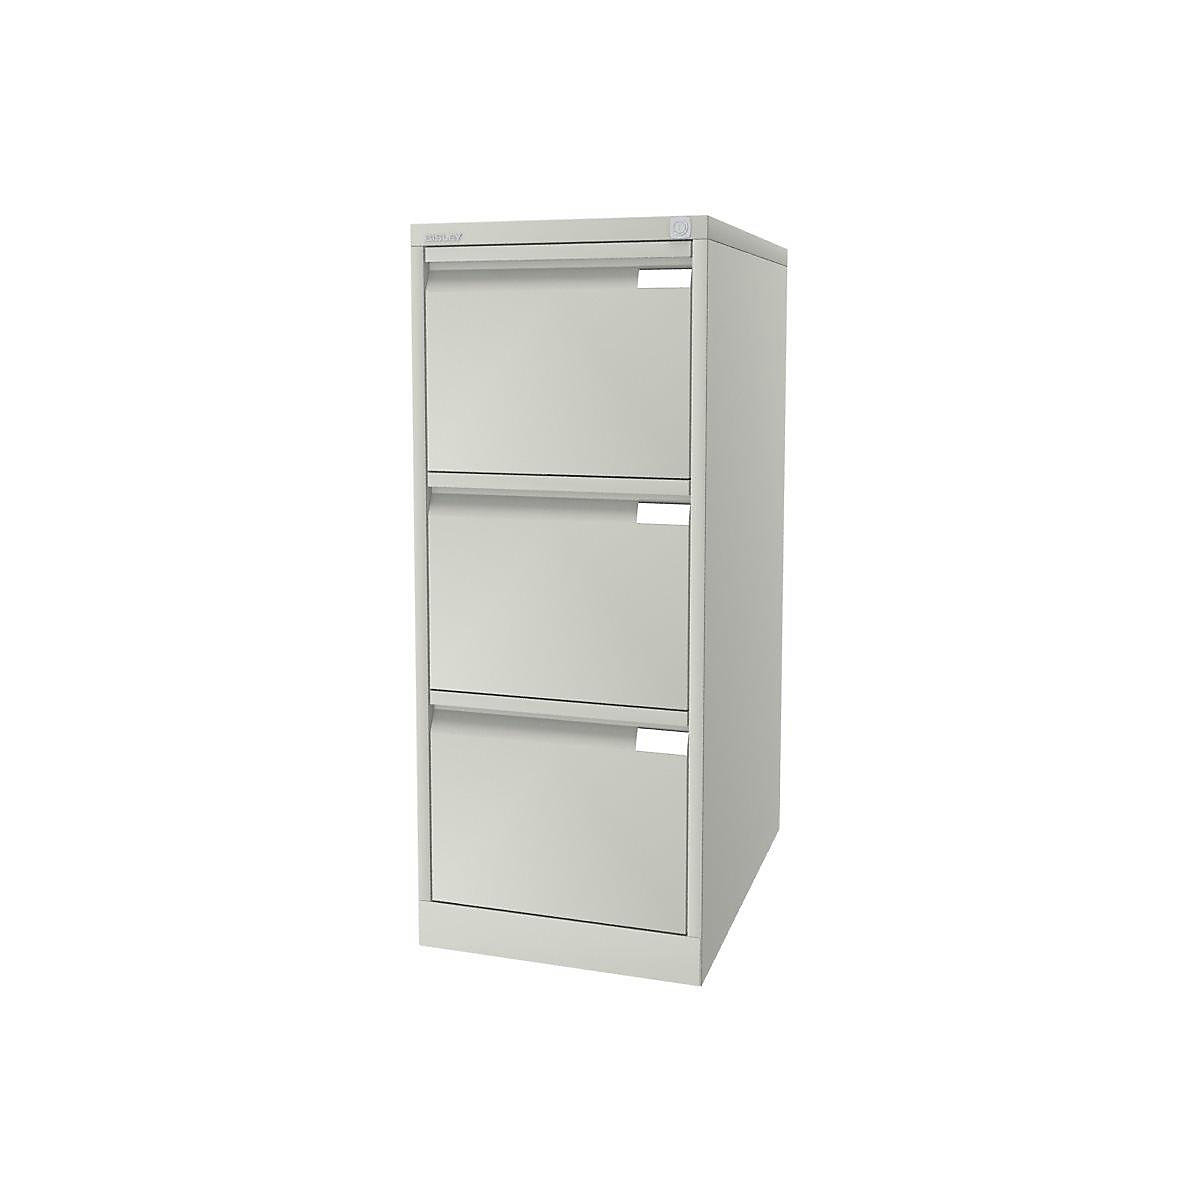 Suspension file cabinet, 1-track – BISLEY, 3 A4 drawers, pure white-19